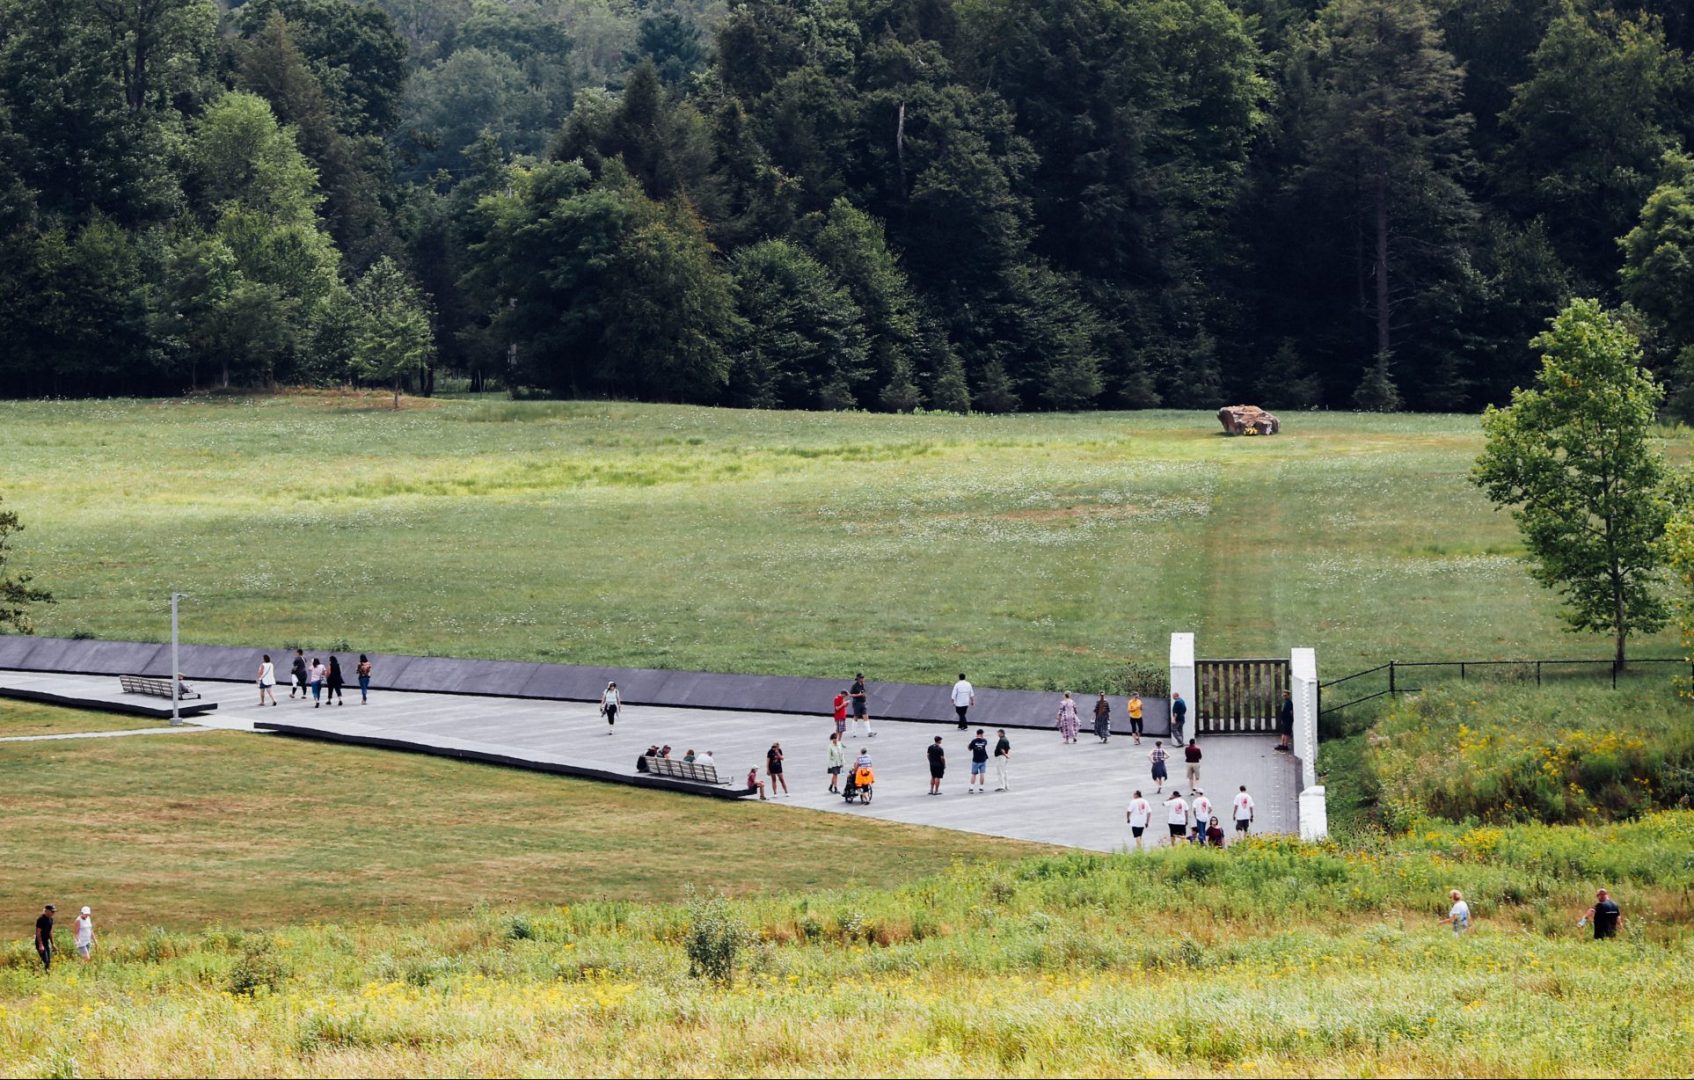 Visitors walk through the Flight 93 National Memorial in southwestern Pennsylvania. The memorial is dedicated to the people who died on United Flight 93 on Sept. 11, 2001.